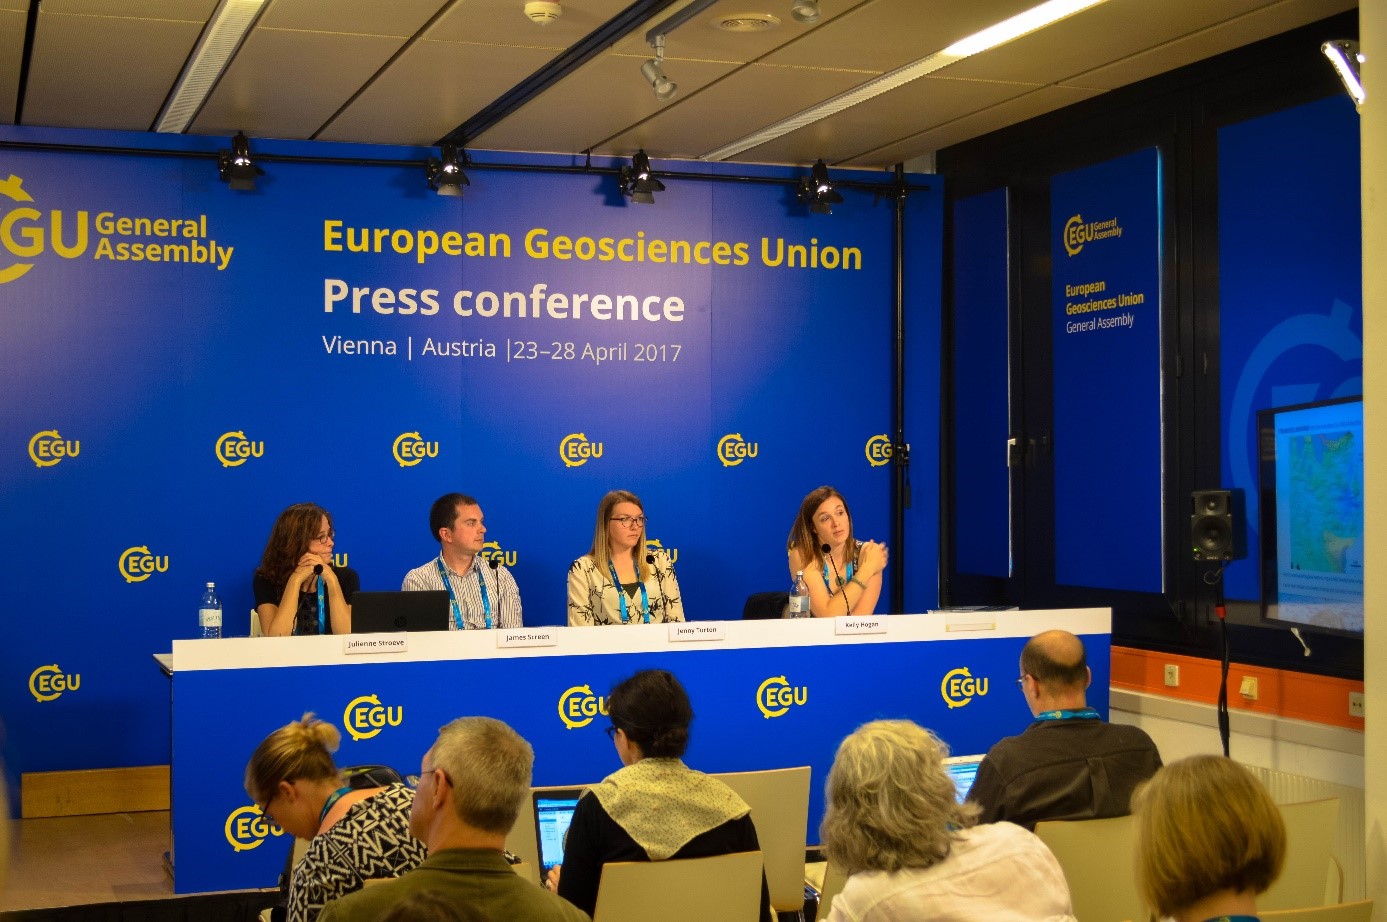 GeoLog | Job opportunity at the EGU General Assembly: press assistant